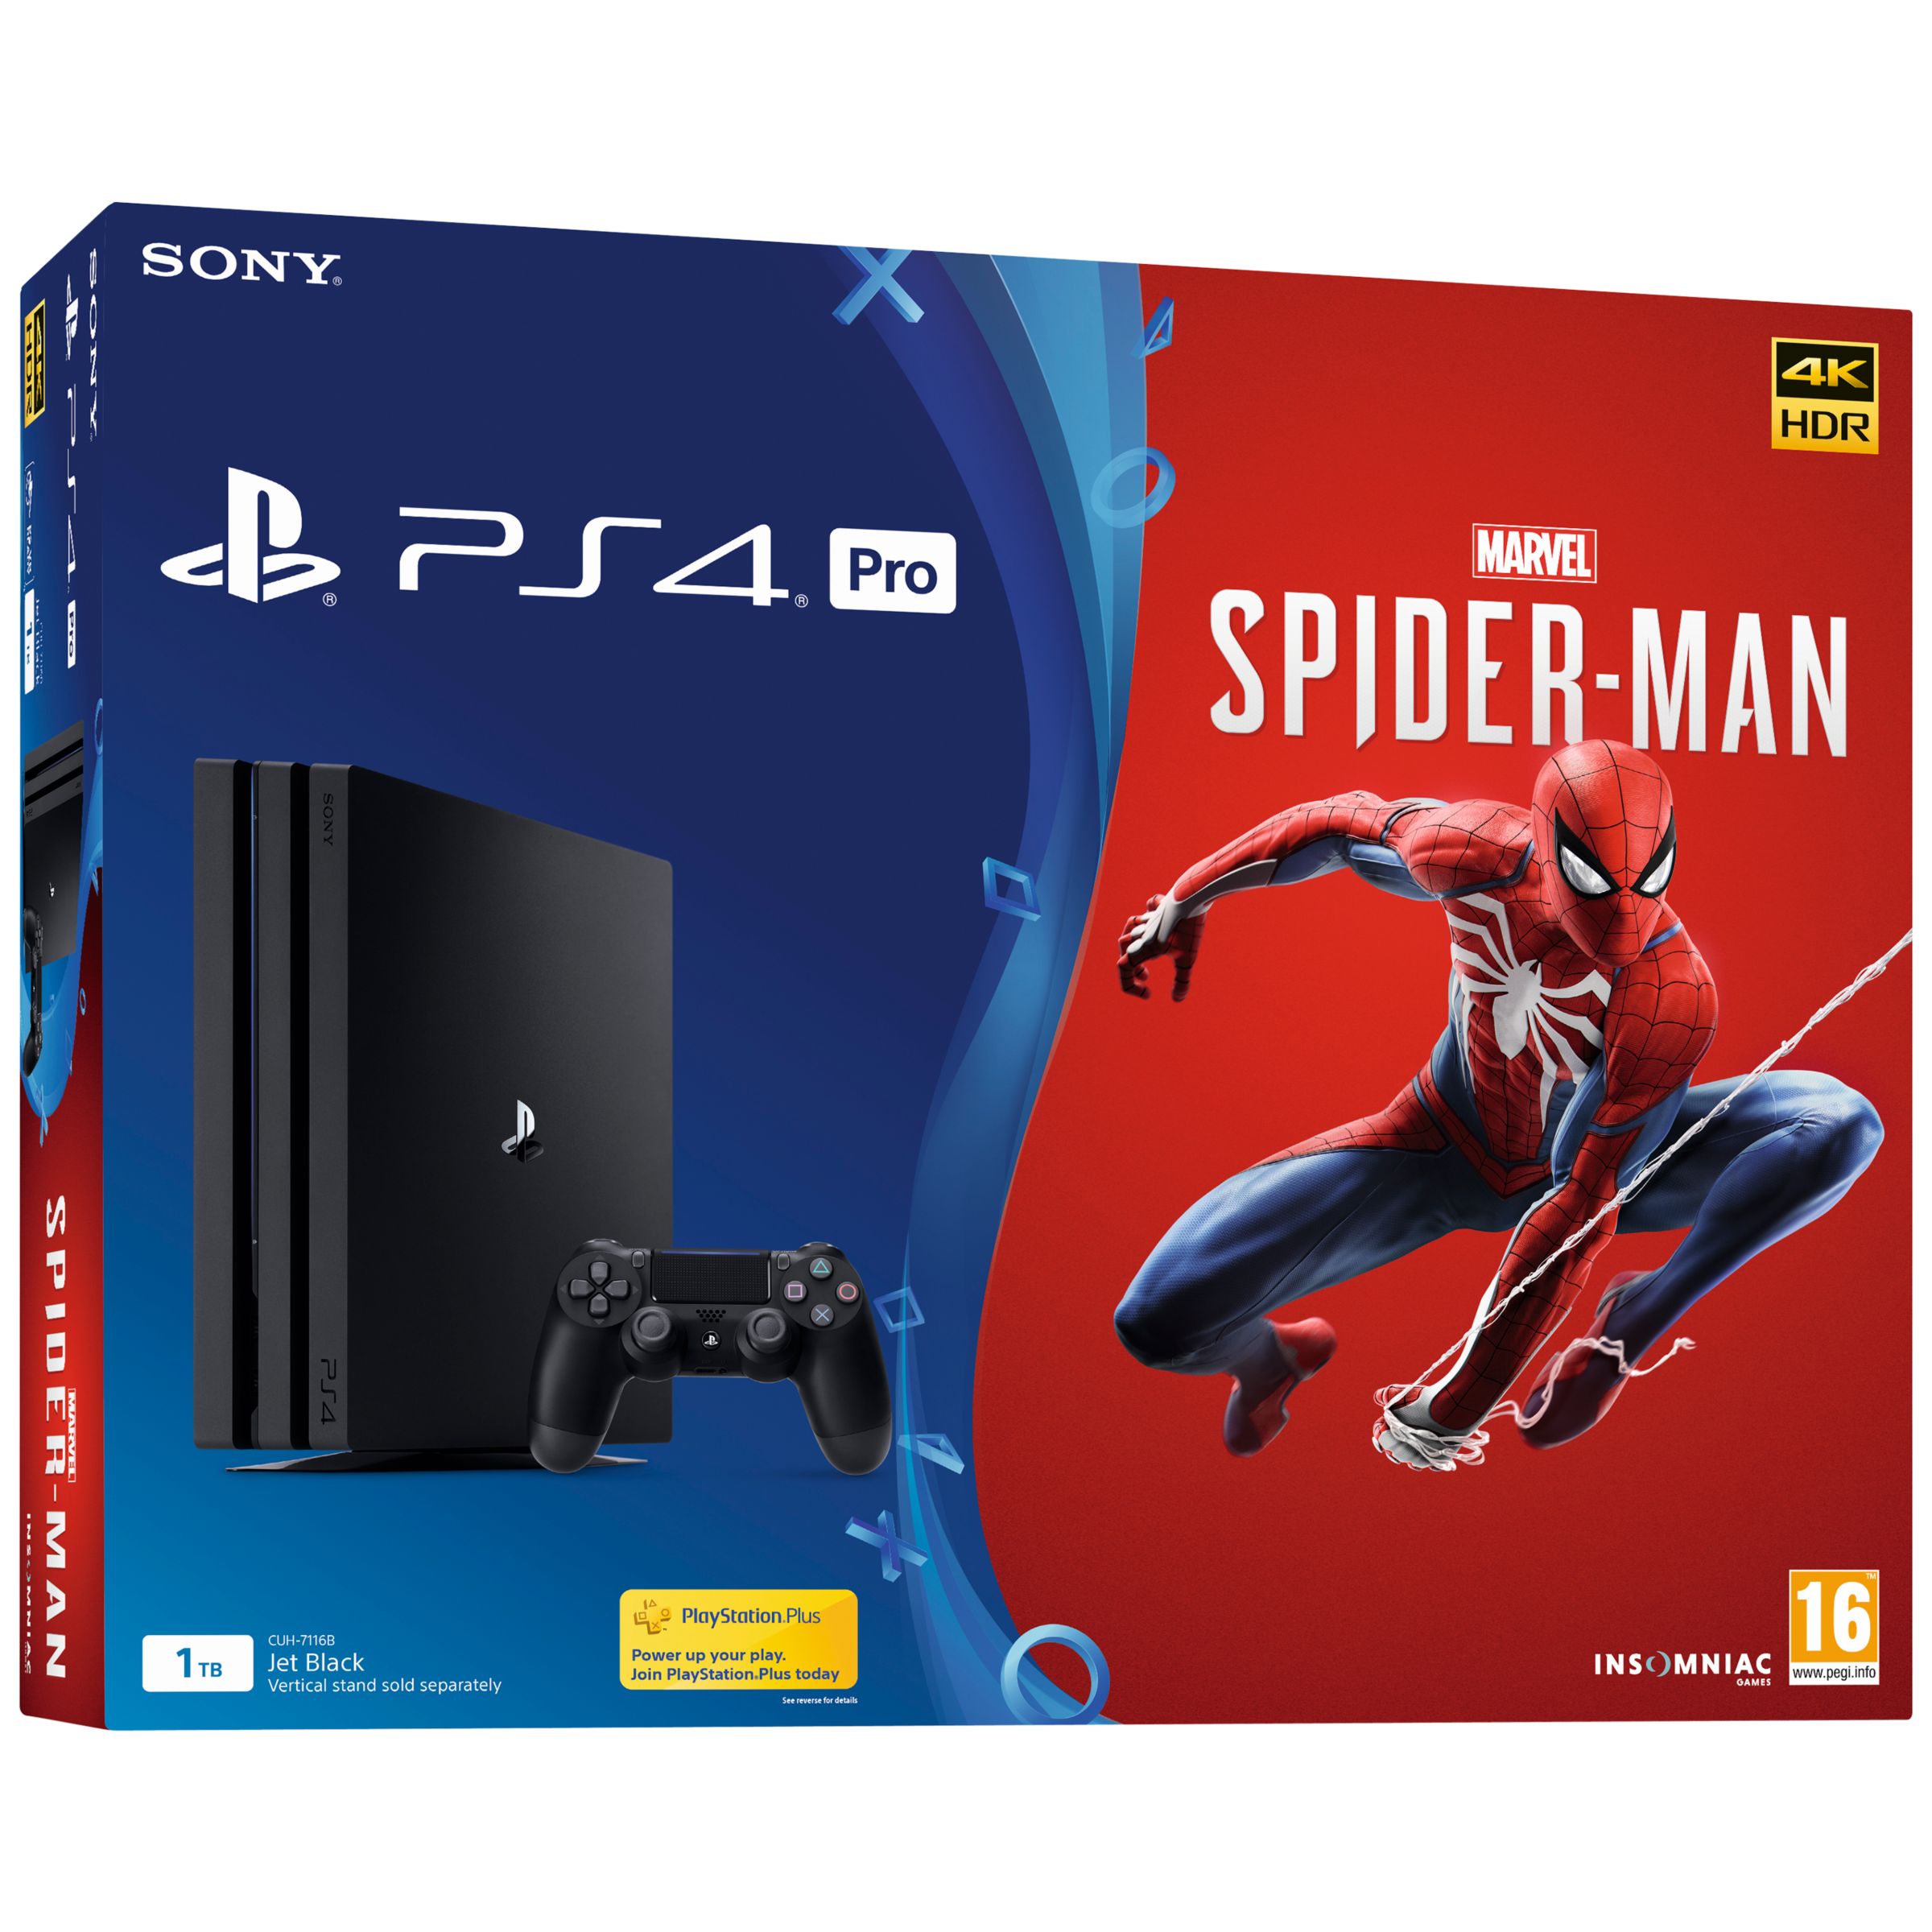 spider man ps4 console